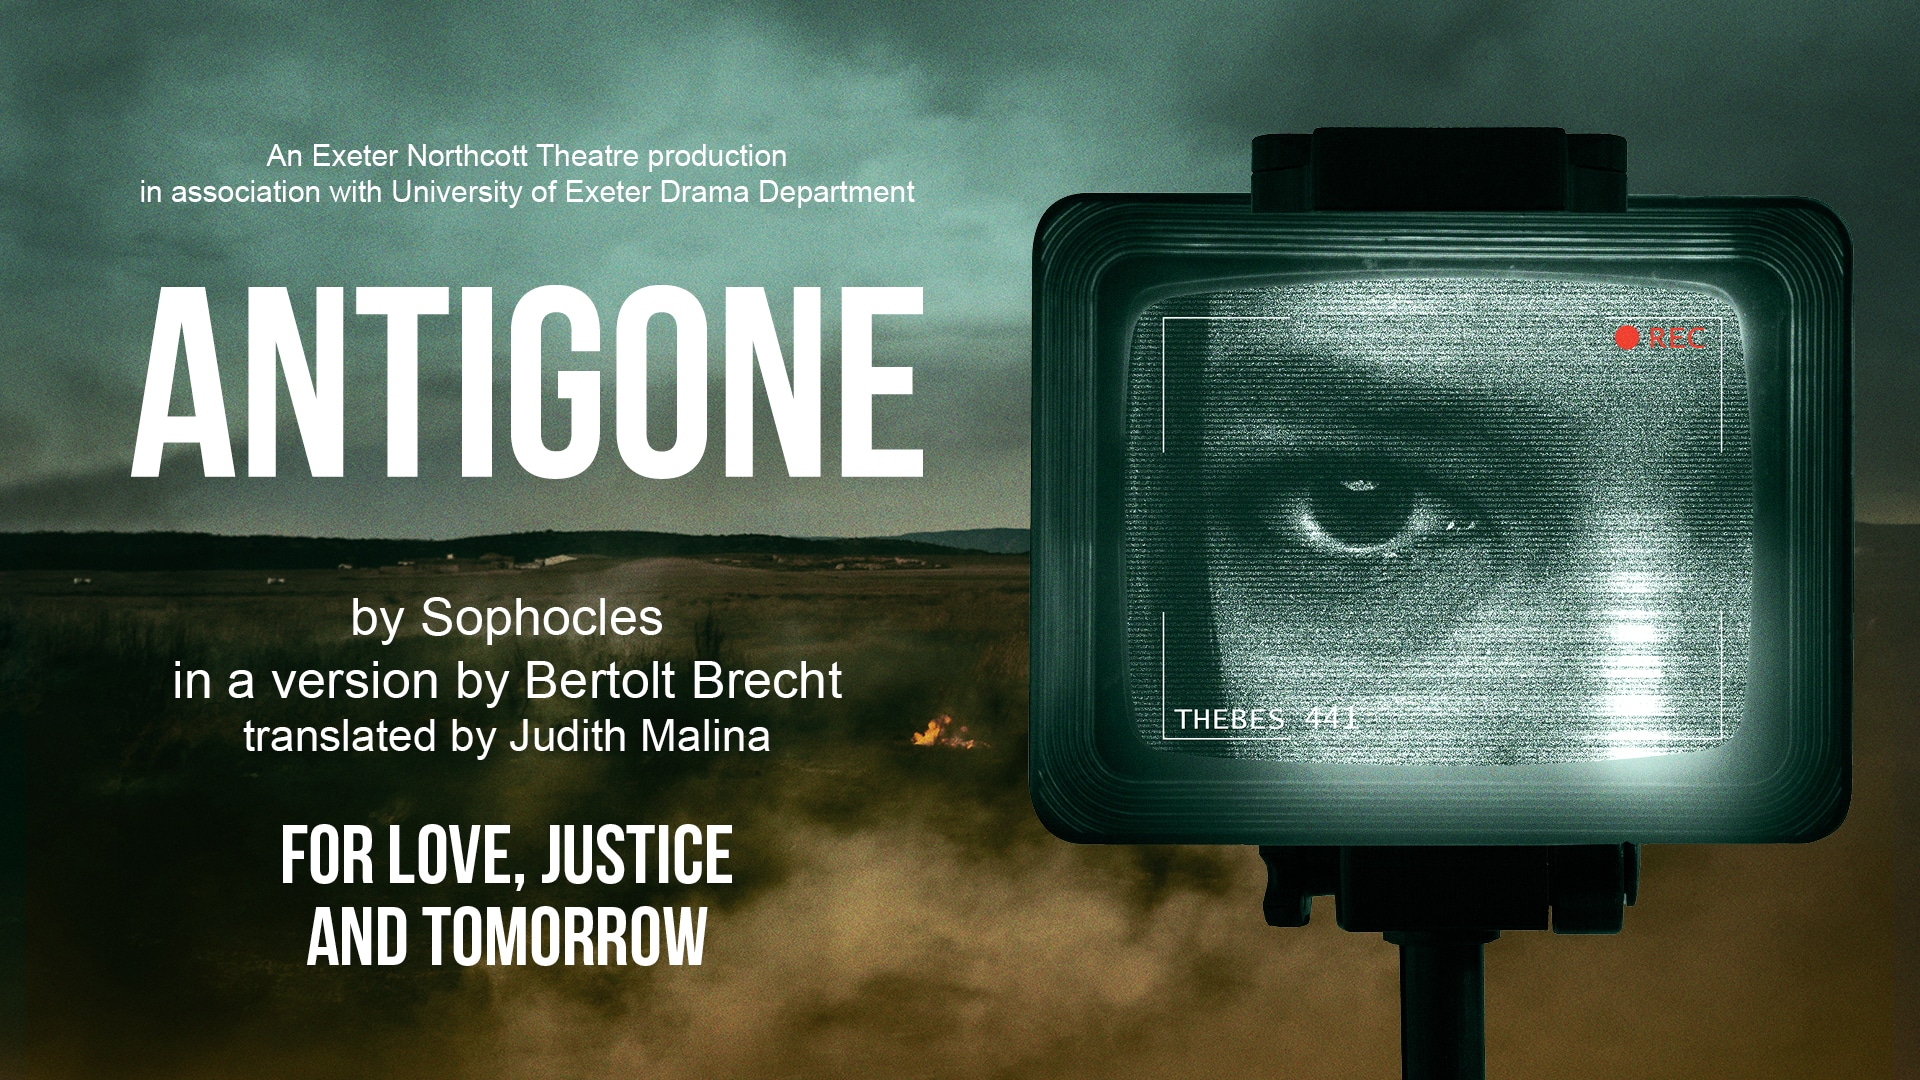 Antigone promotional image - a young woman on a security camera looking in closely and intensely